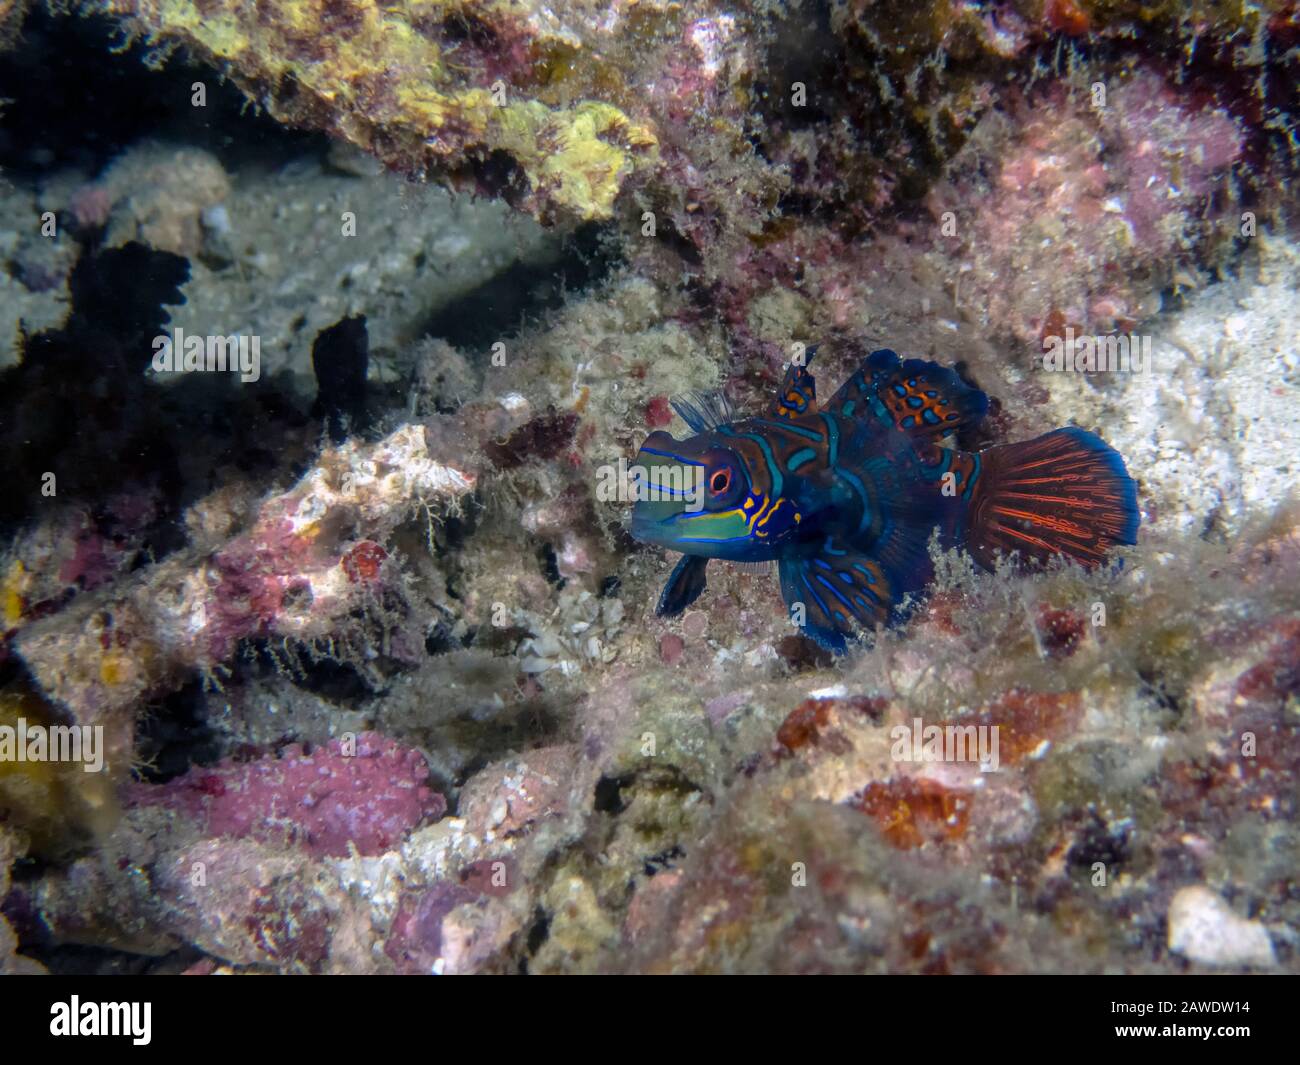 Colourful Madarinfish (Synchiropus splendidus) on a night dive in the Philippines Stock Photo